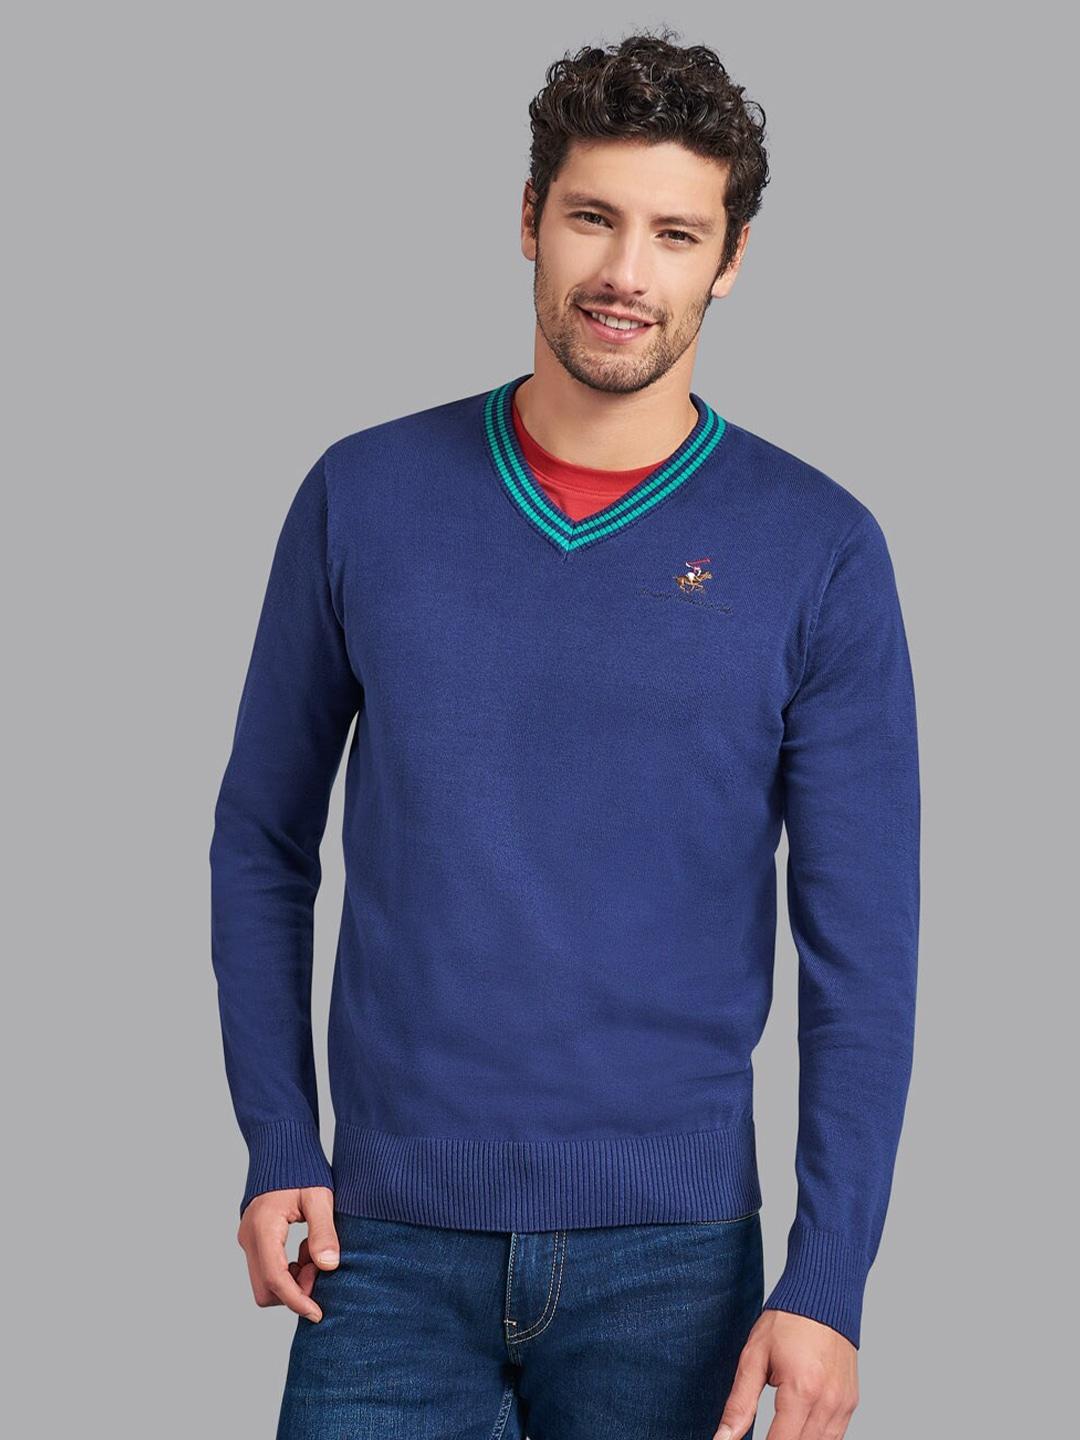 beverly-hills-polo-club-men-navy-blue-&-green-cotton-pullover